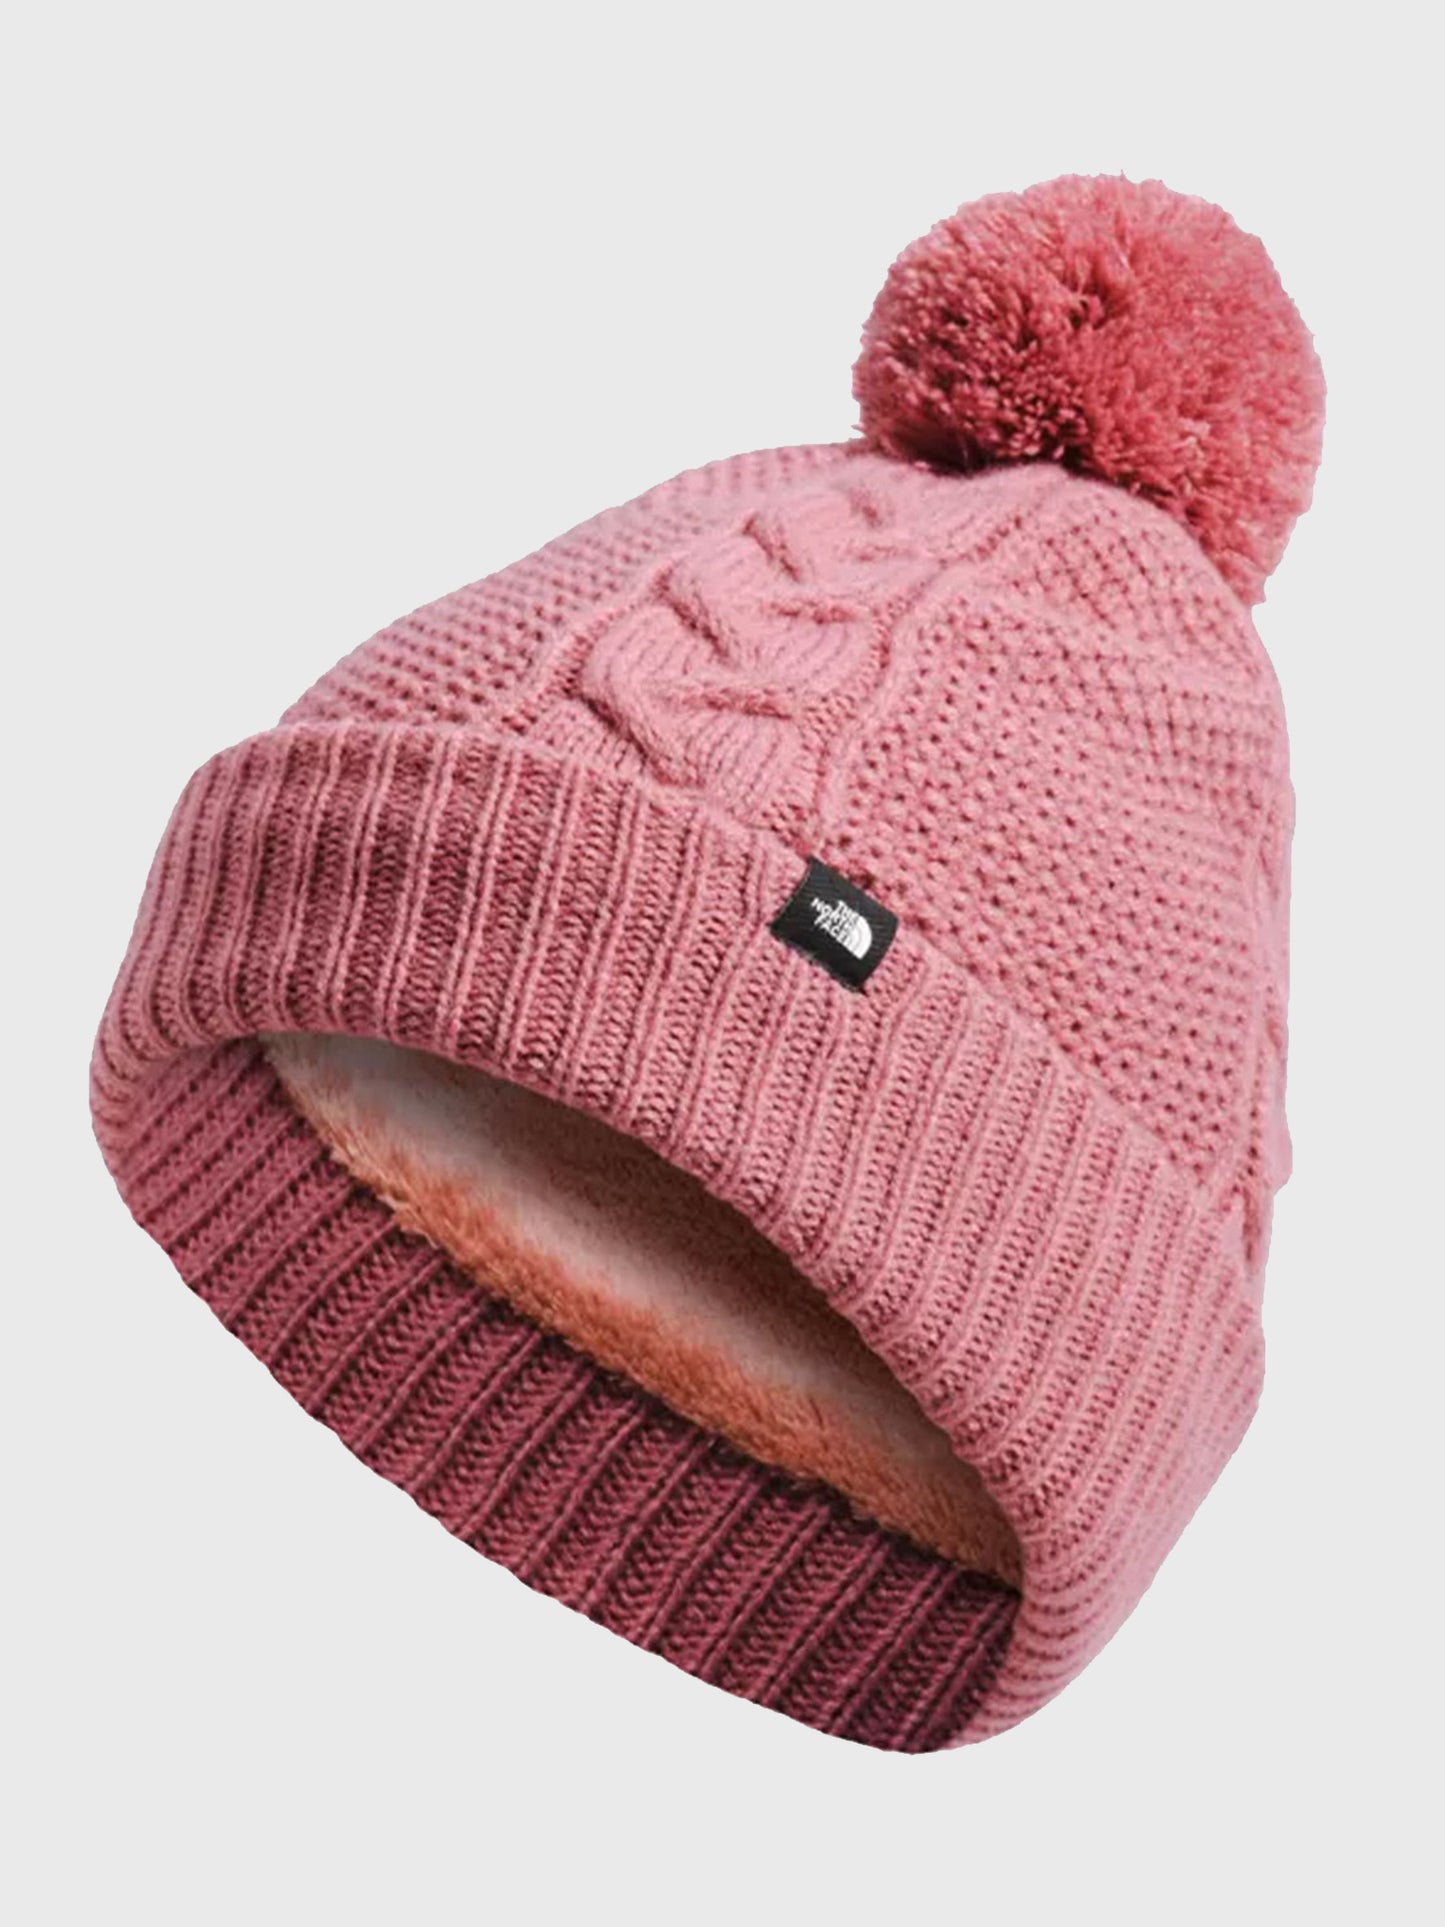 The North Face Women’s Cable Minna Beanie